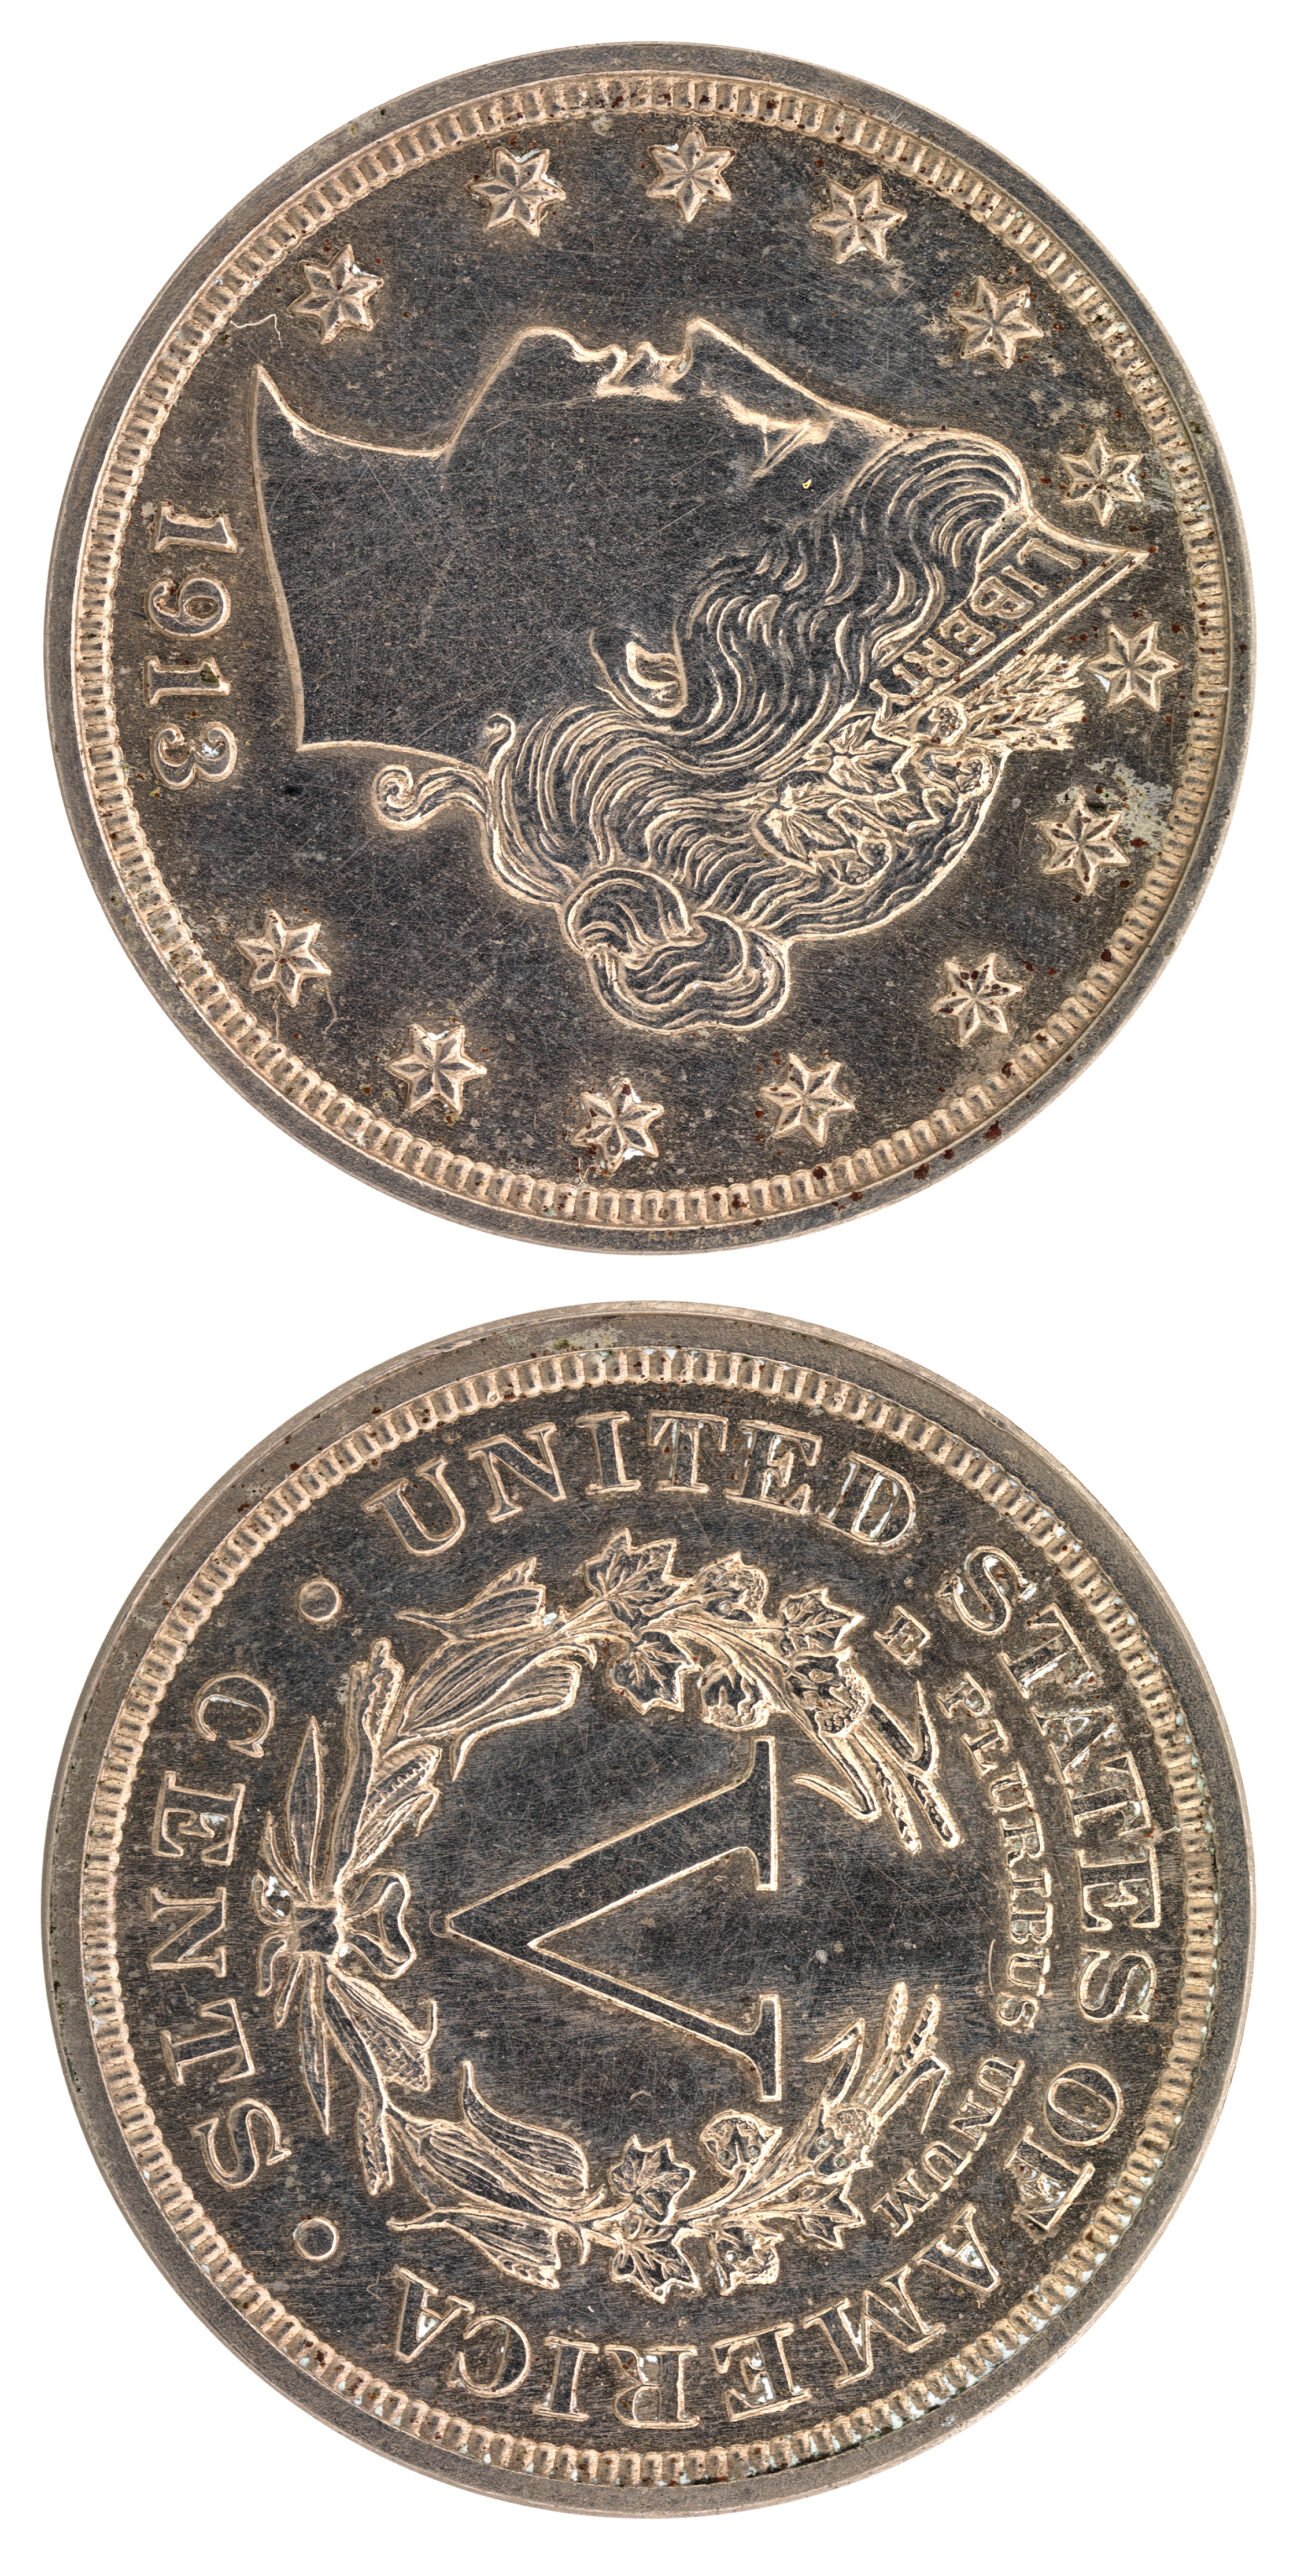 10 Most Valuable Rare Coins Wanted By Collectors - Damia Global Services